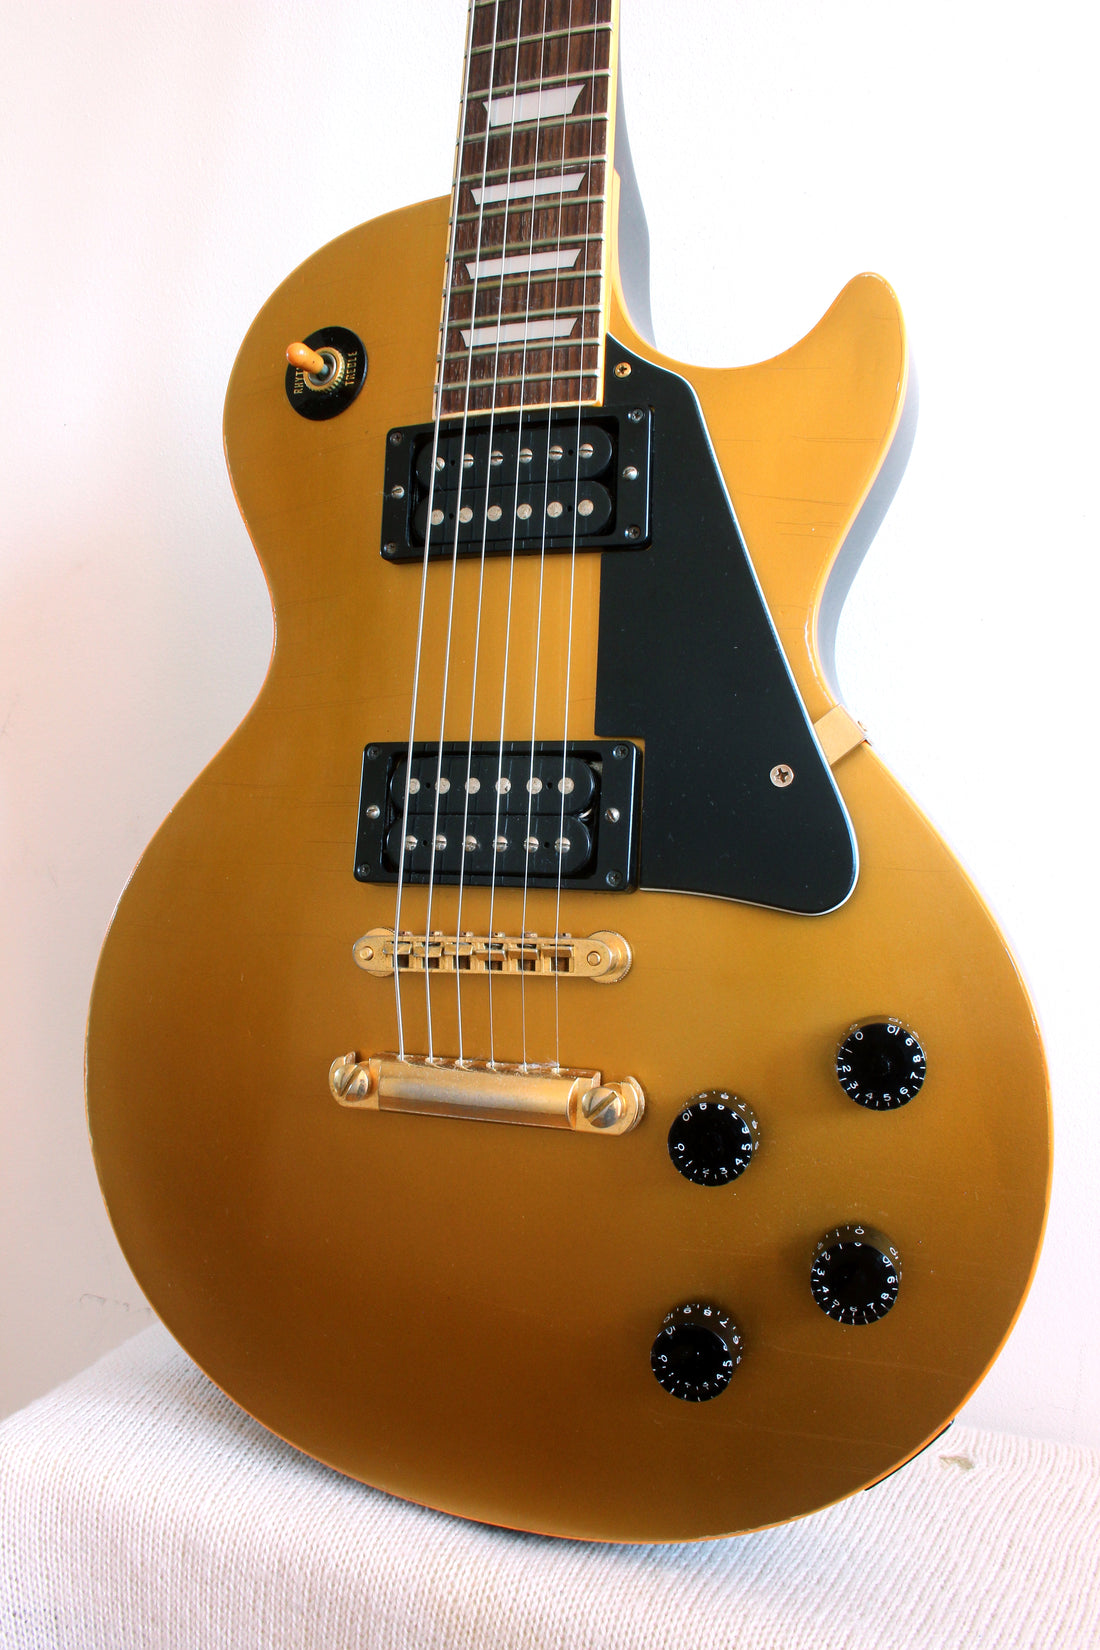 Used Greco LP EG-450 Gold Top Modded 1978